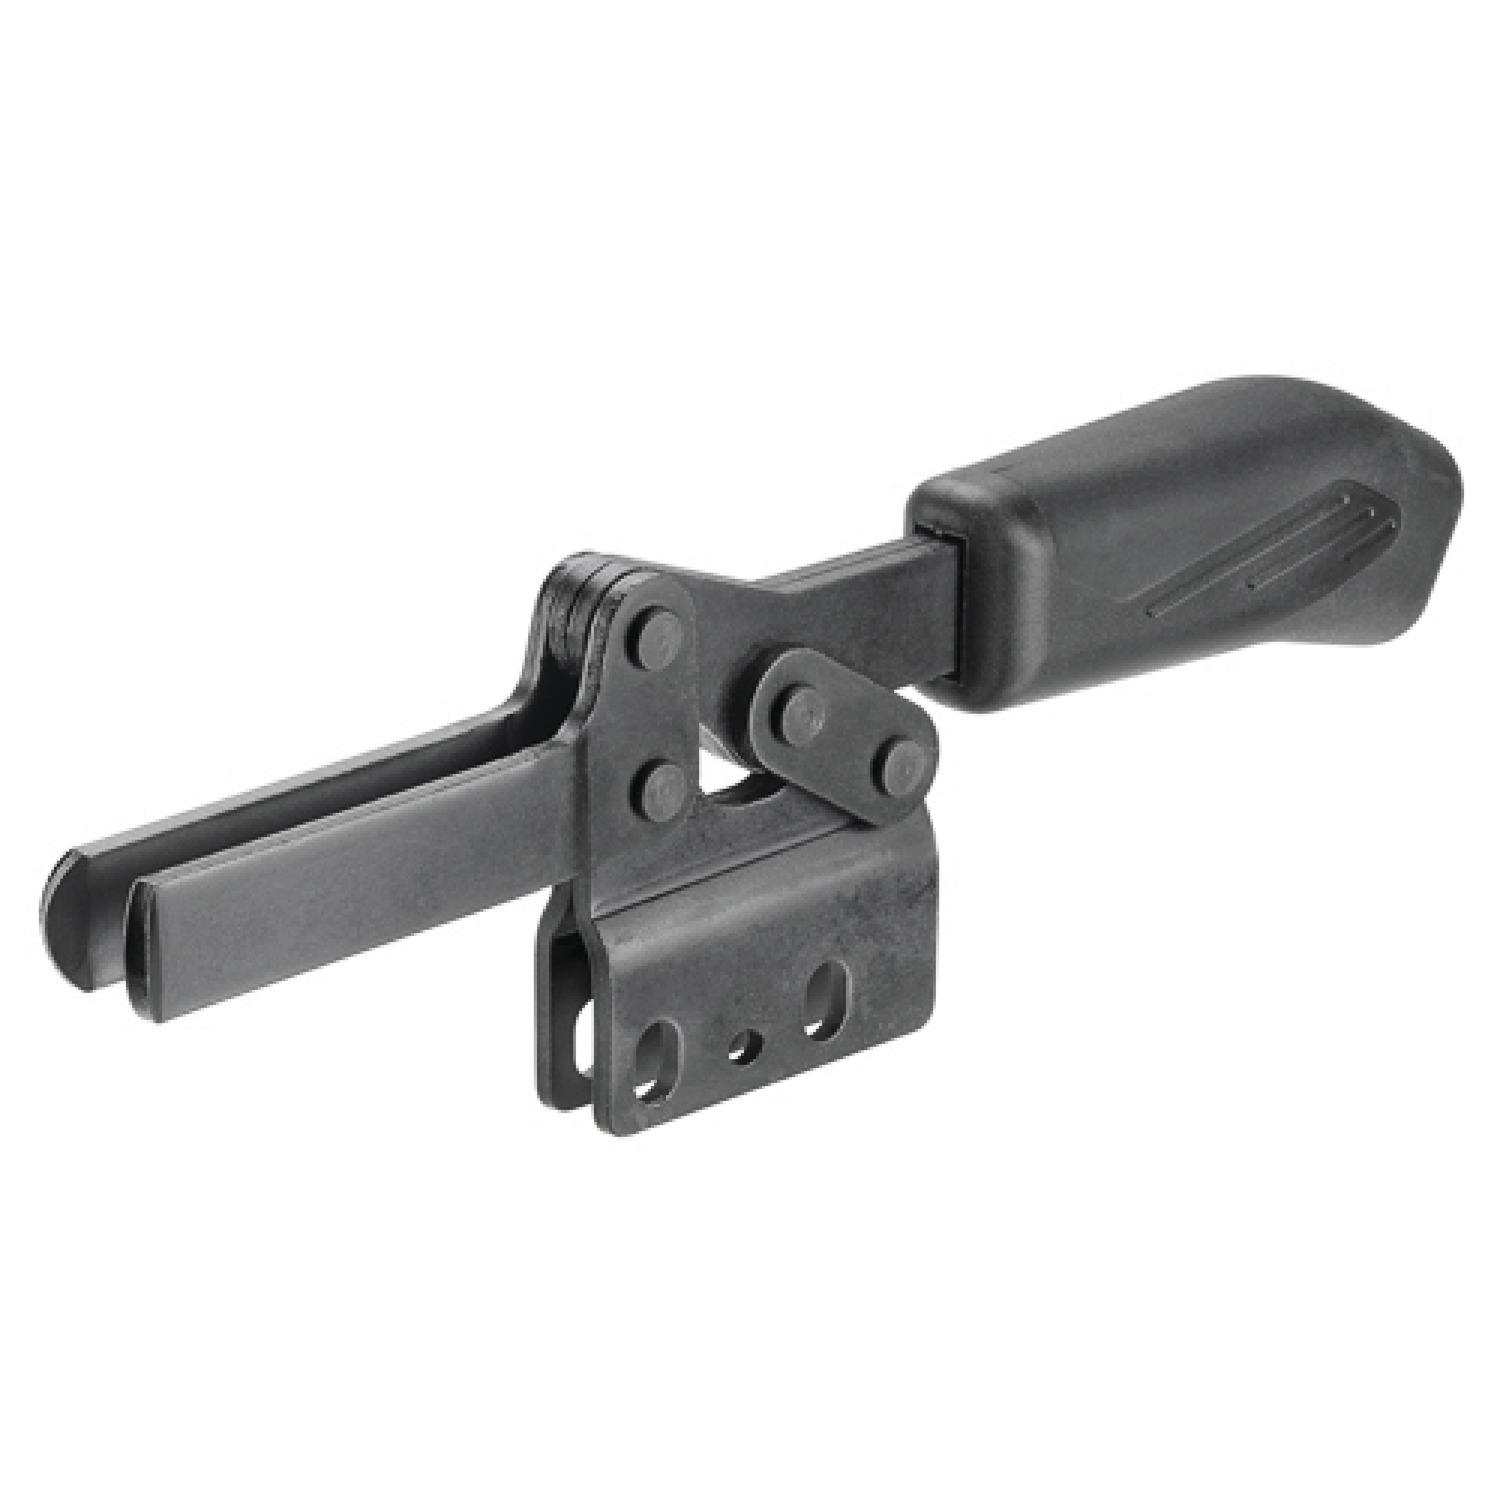 Product 41062.2, Horizontal Acting Toggle Clamps black - open arm - vertical base / 